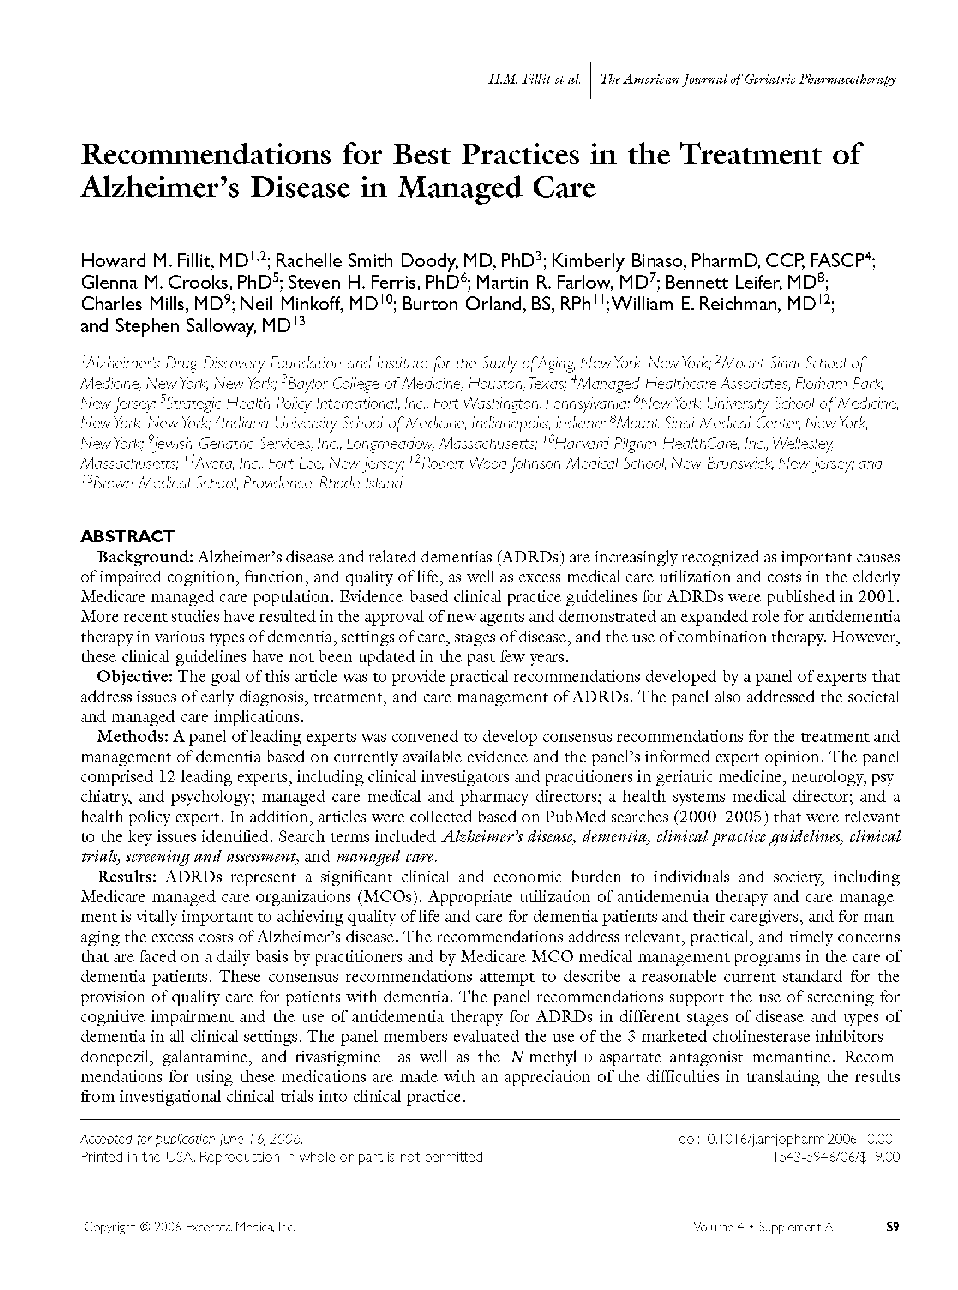 Recommendations for best practices in the treatment of Alzheimer's disease in managed care